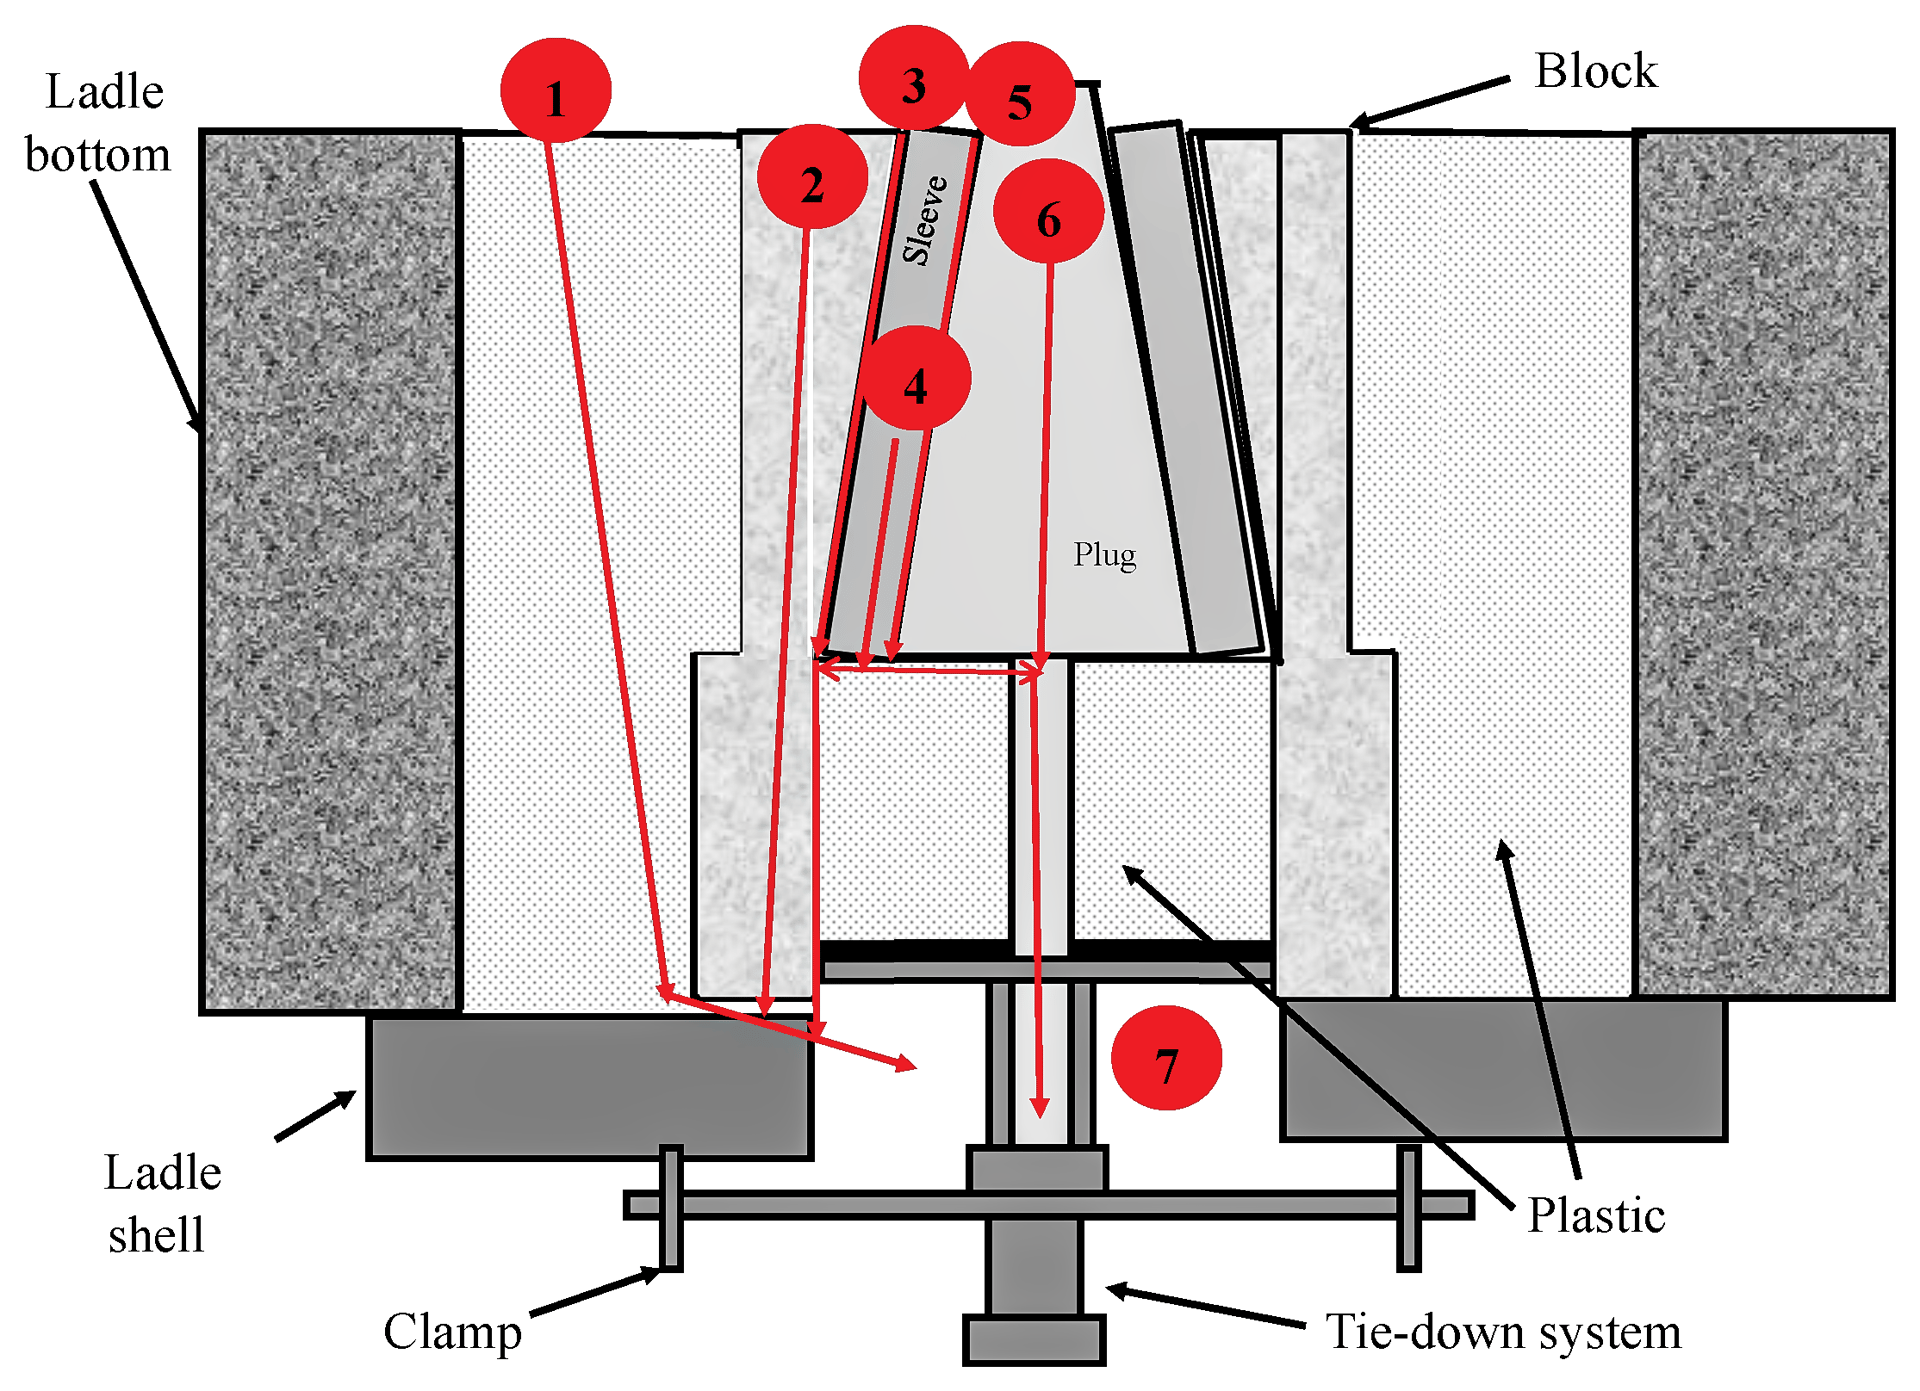 Seven main failure modes through which molten steel escapes in a direct stirring system